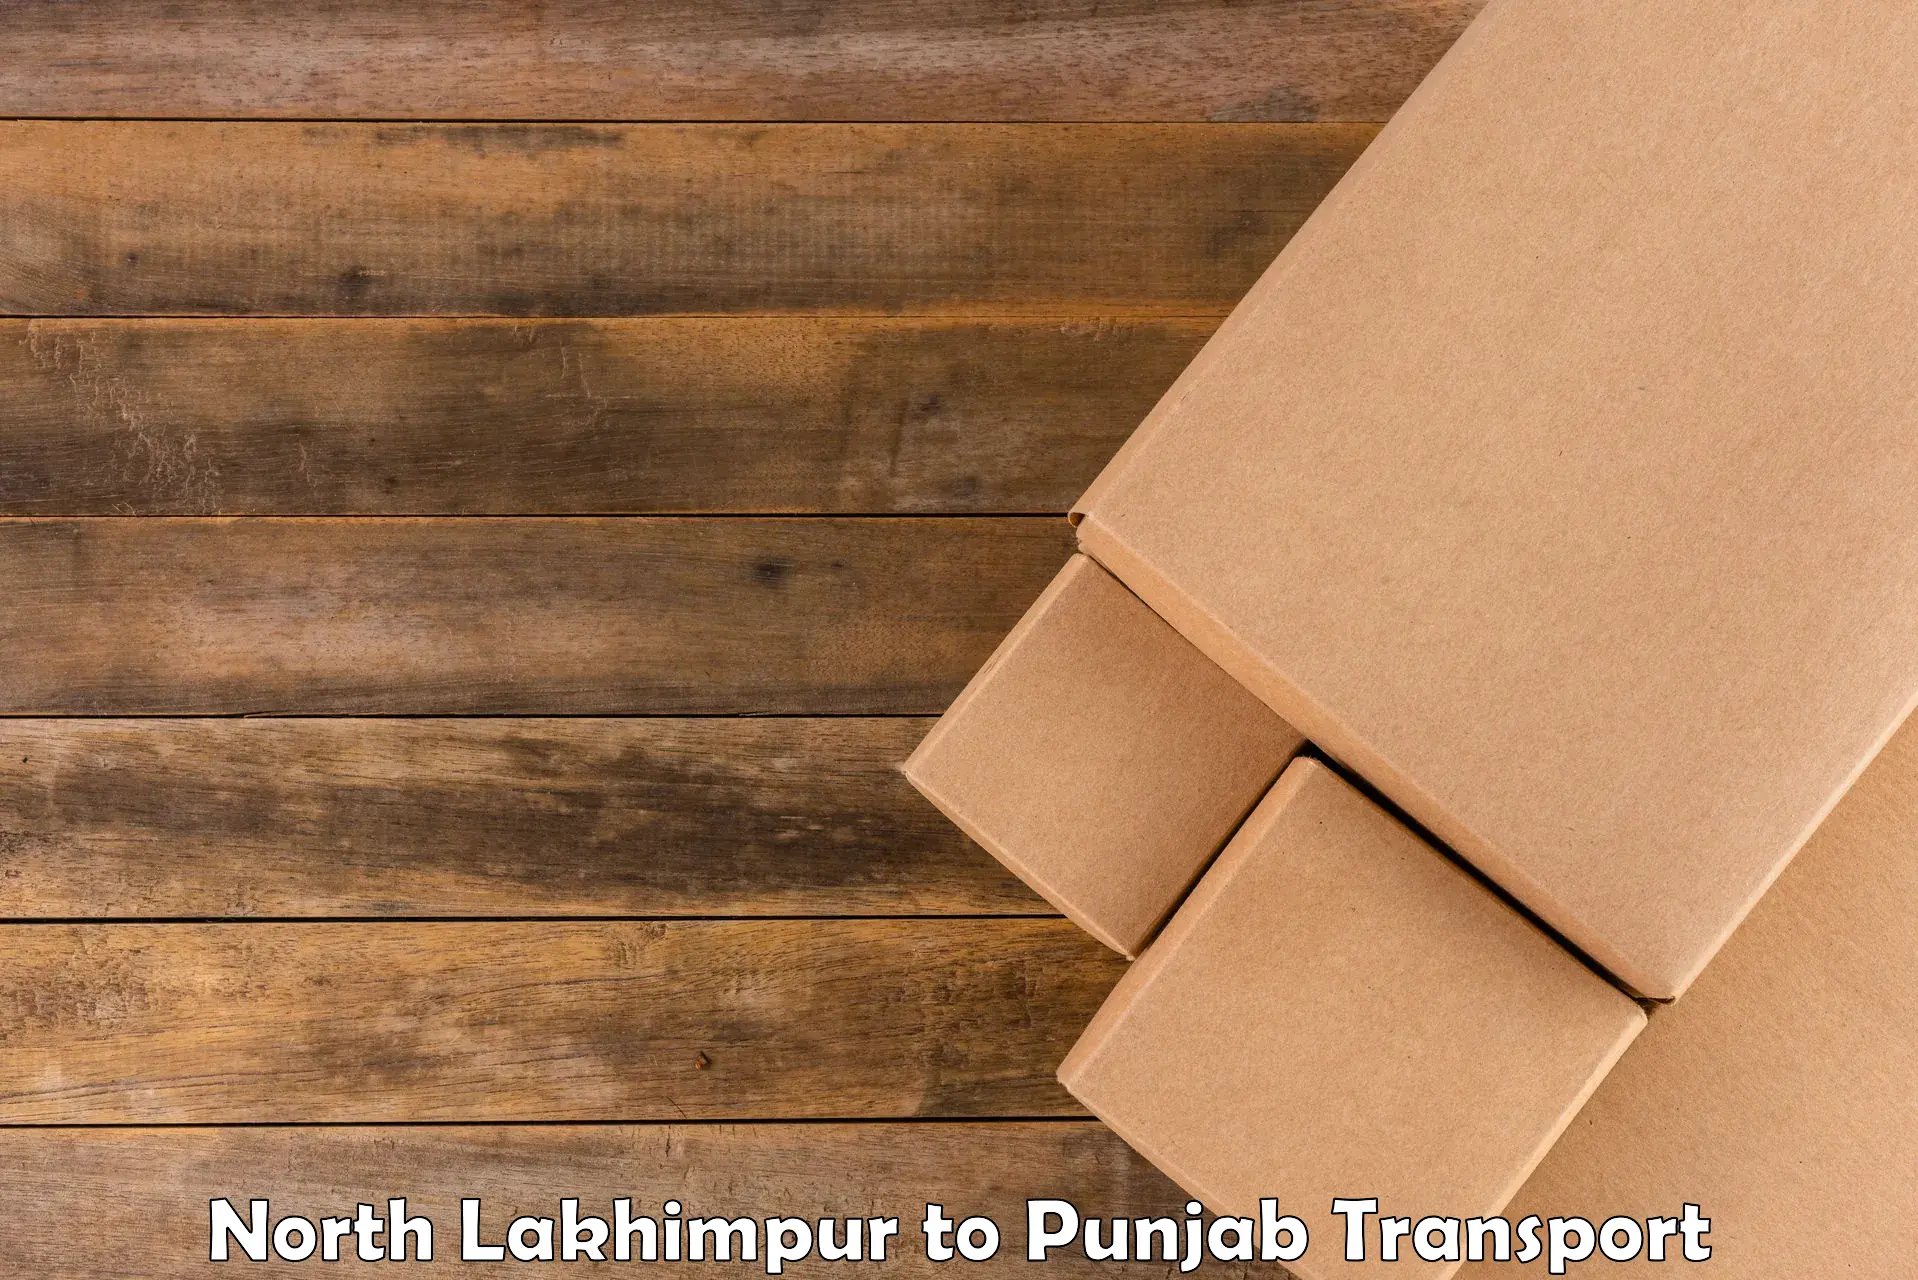 Container transportation services in North Lakhimpur to Mohali